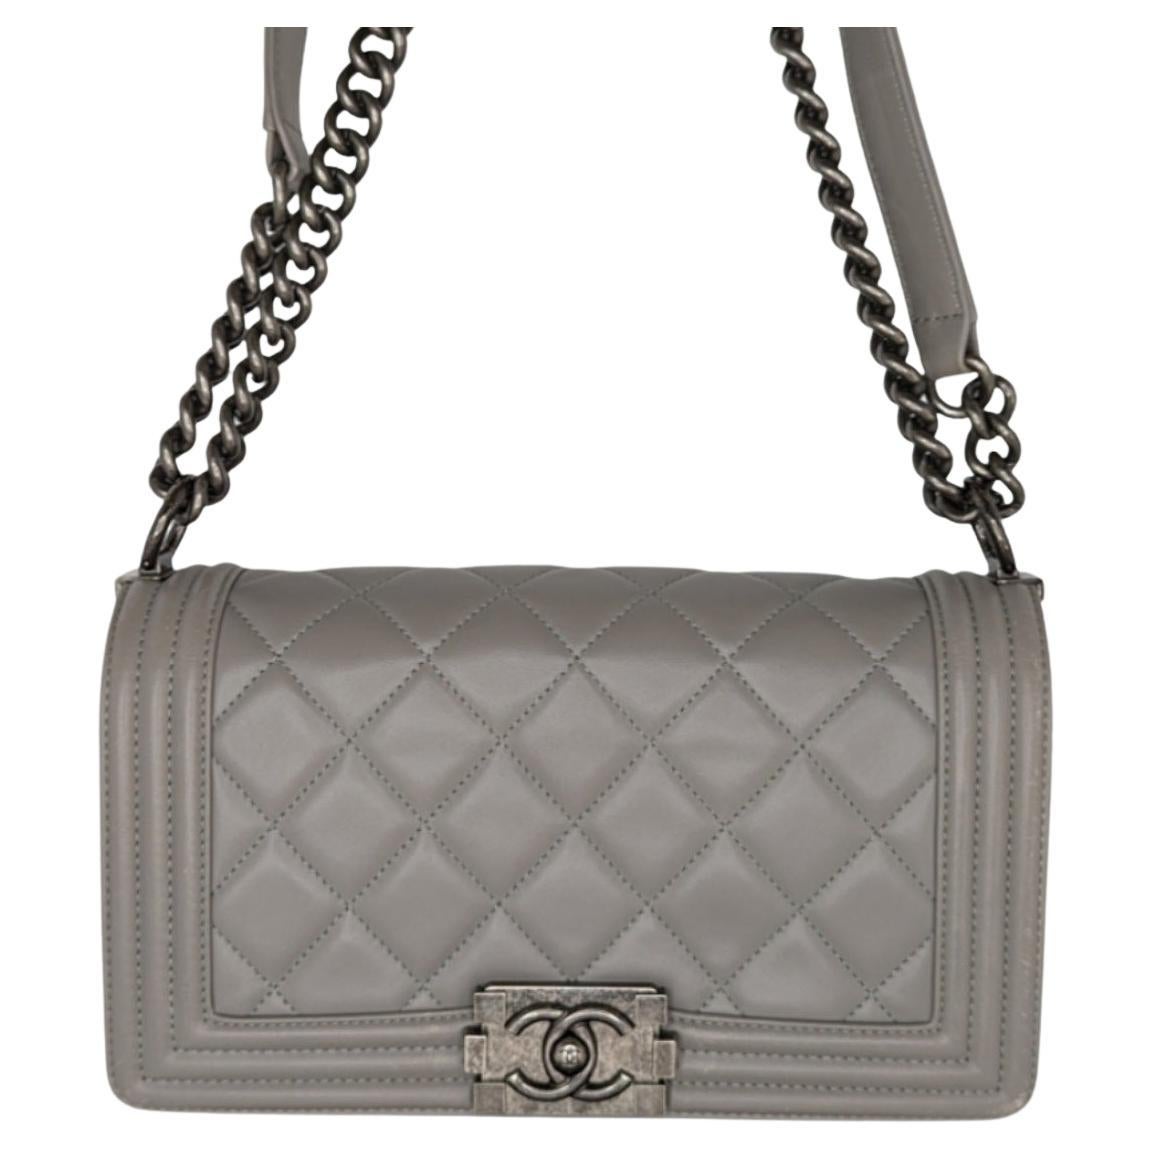 Chanel Gray Quilted Calfskin Medium Boy Bag For Sale